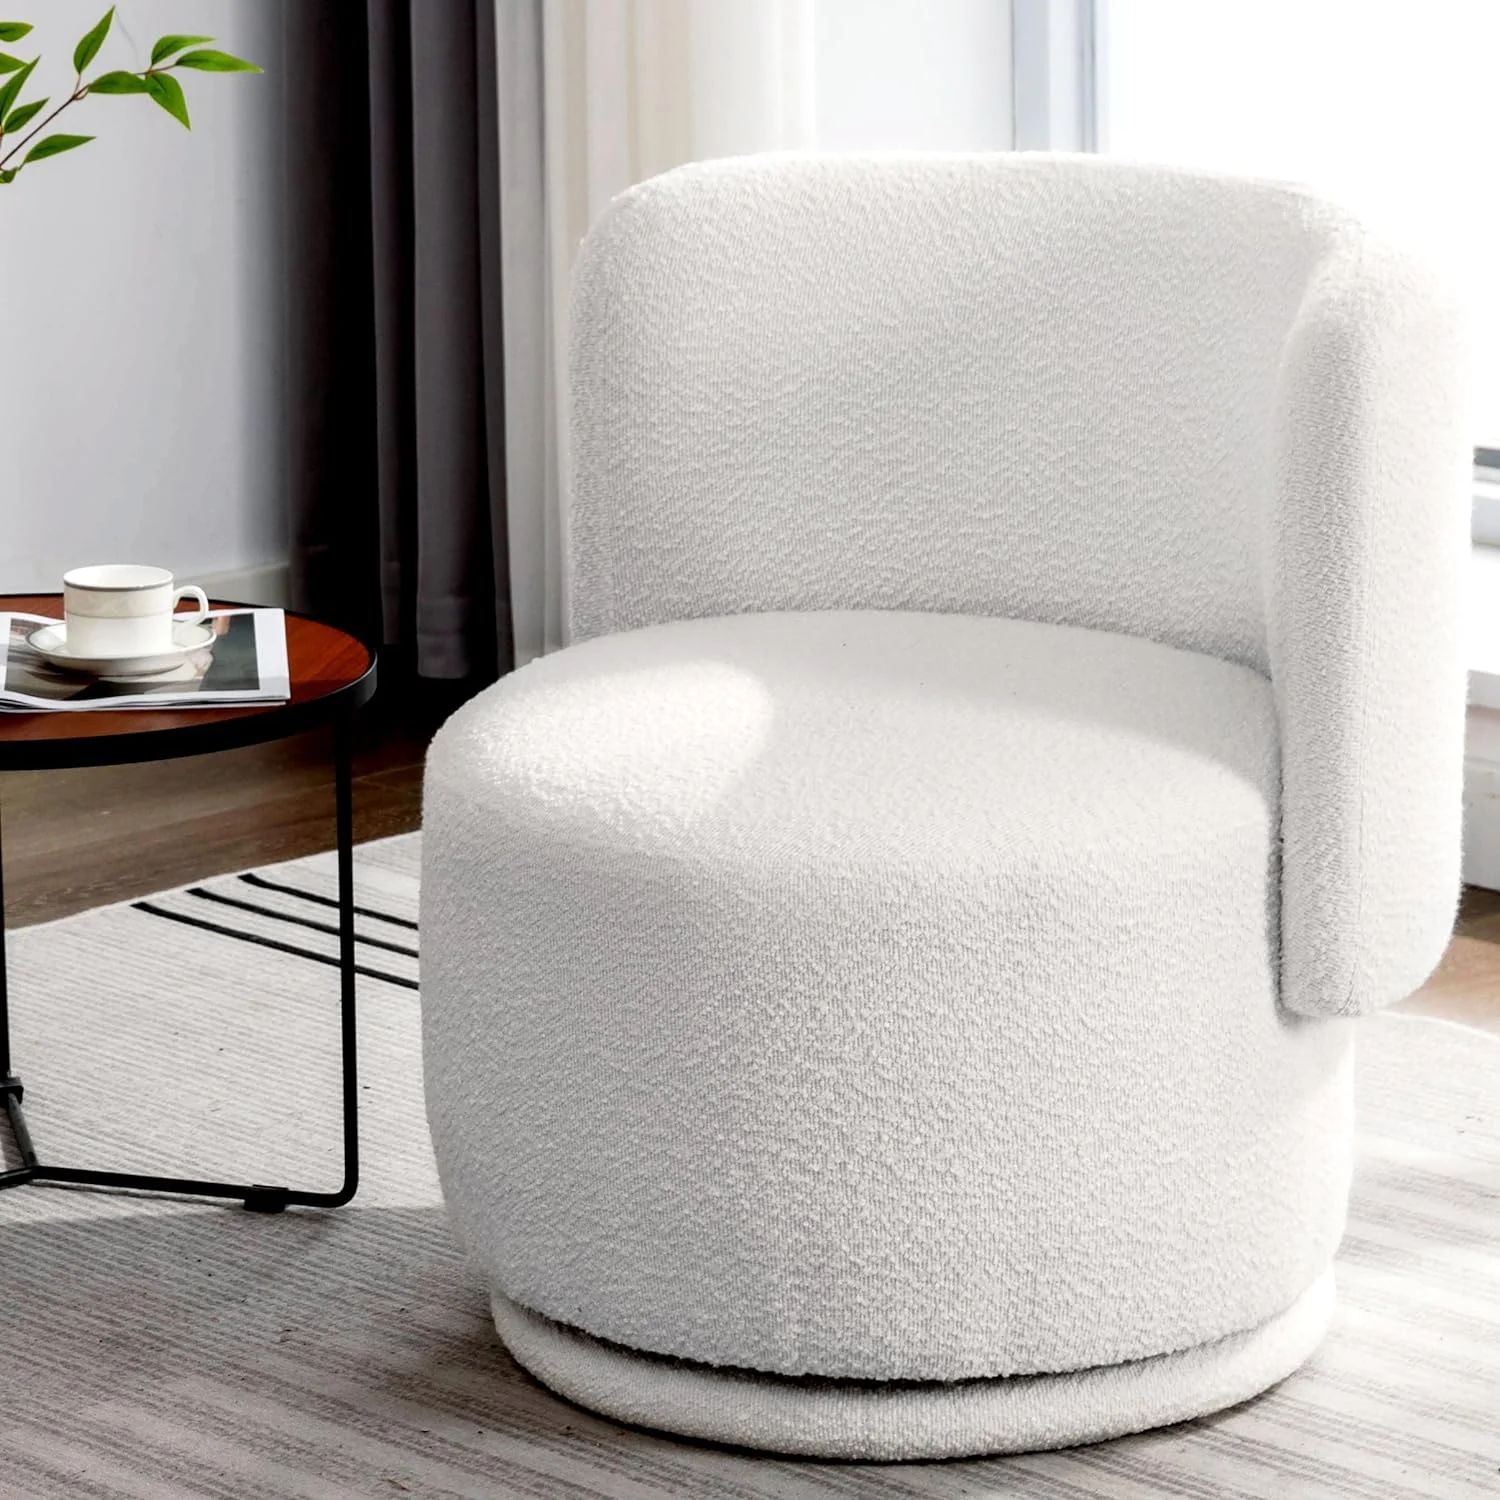 Locus Bono Swivel Accent Chair,Boucle Swivel Chair for Living Room,for Adult,Cream/White | Walmart (US)